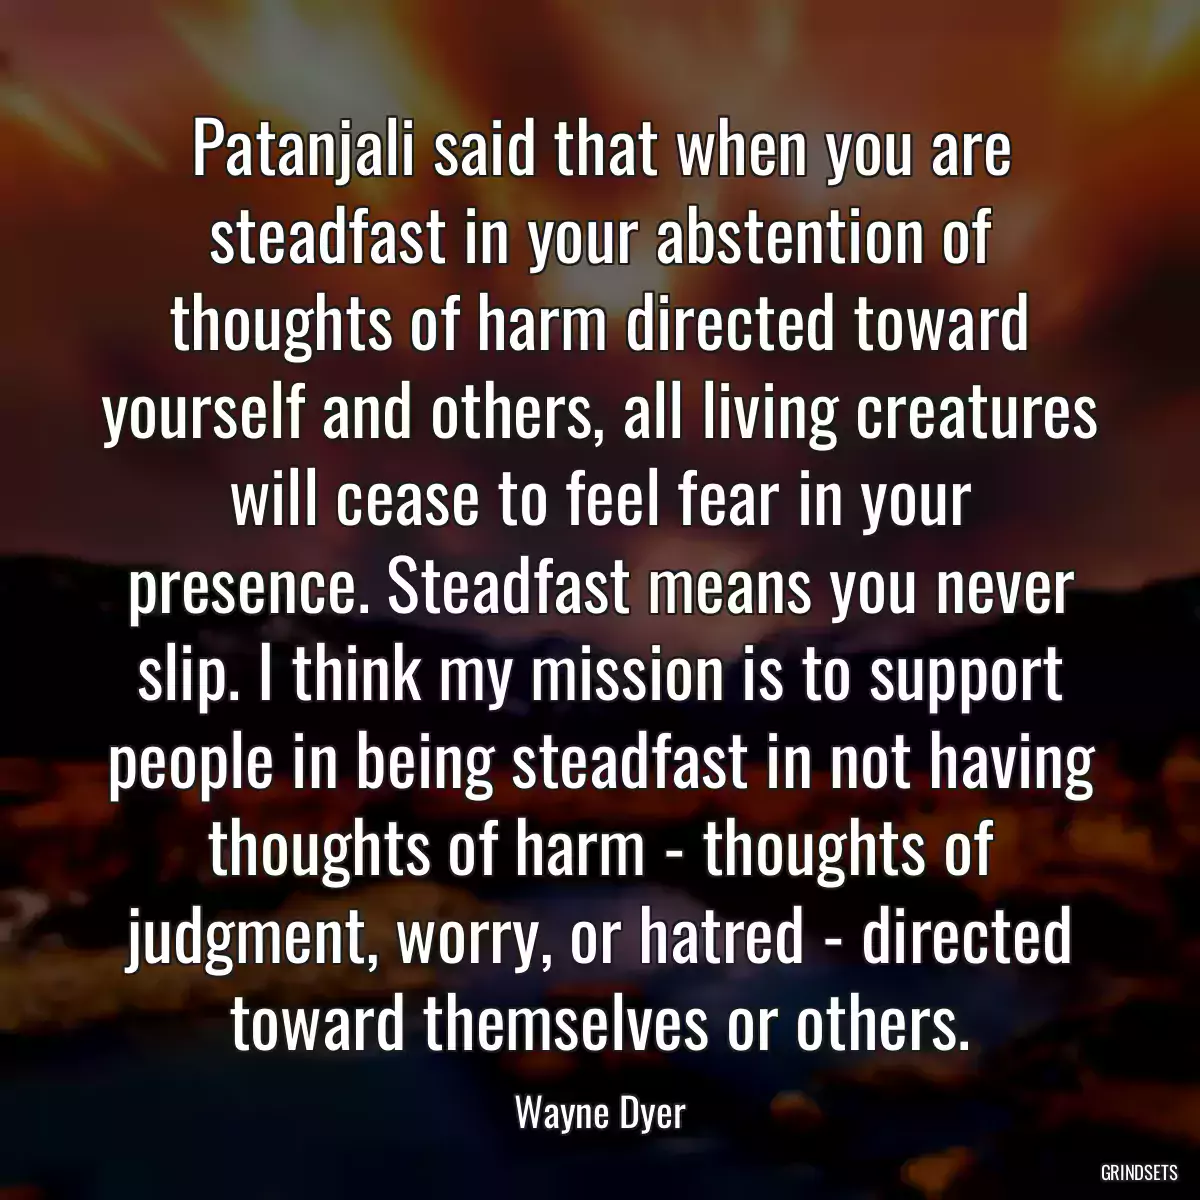 Patanjali said that when you are steadfast in your abstention of thoughts of harm directed toward yourself and others, all living creatures will cease to feel fear in your presence. Steadfast means you never slip. I think my mission is to support people in being steadfast in not having thoughts of harm - thoughts of judgment, worry, or hatred - directed toward themselves or others.